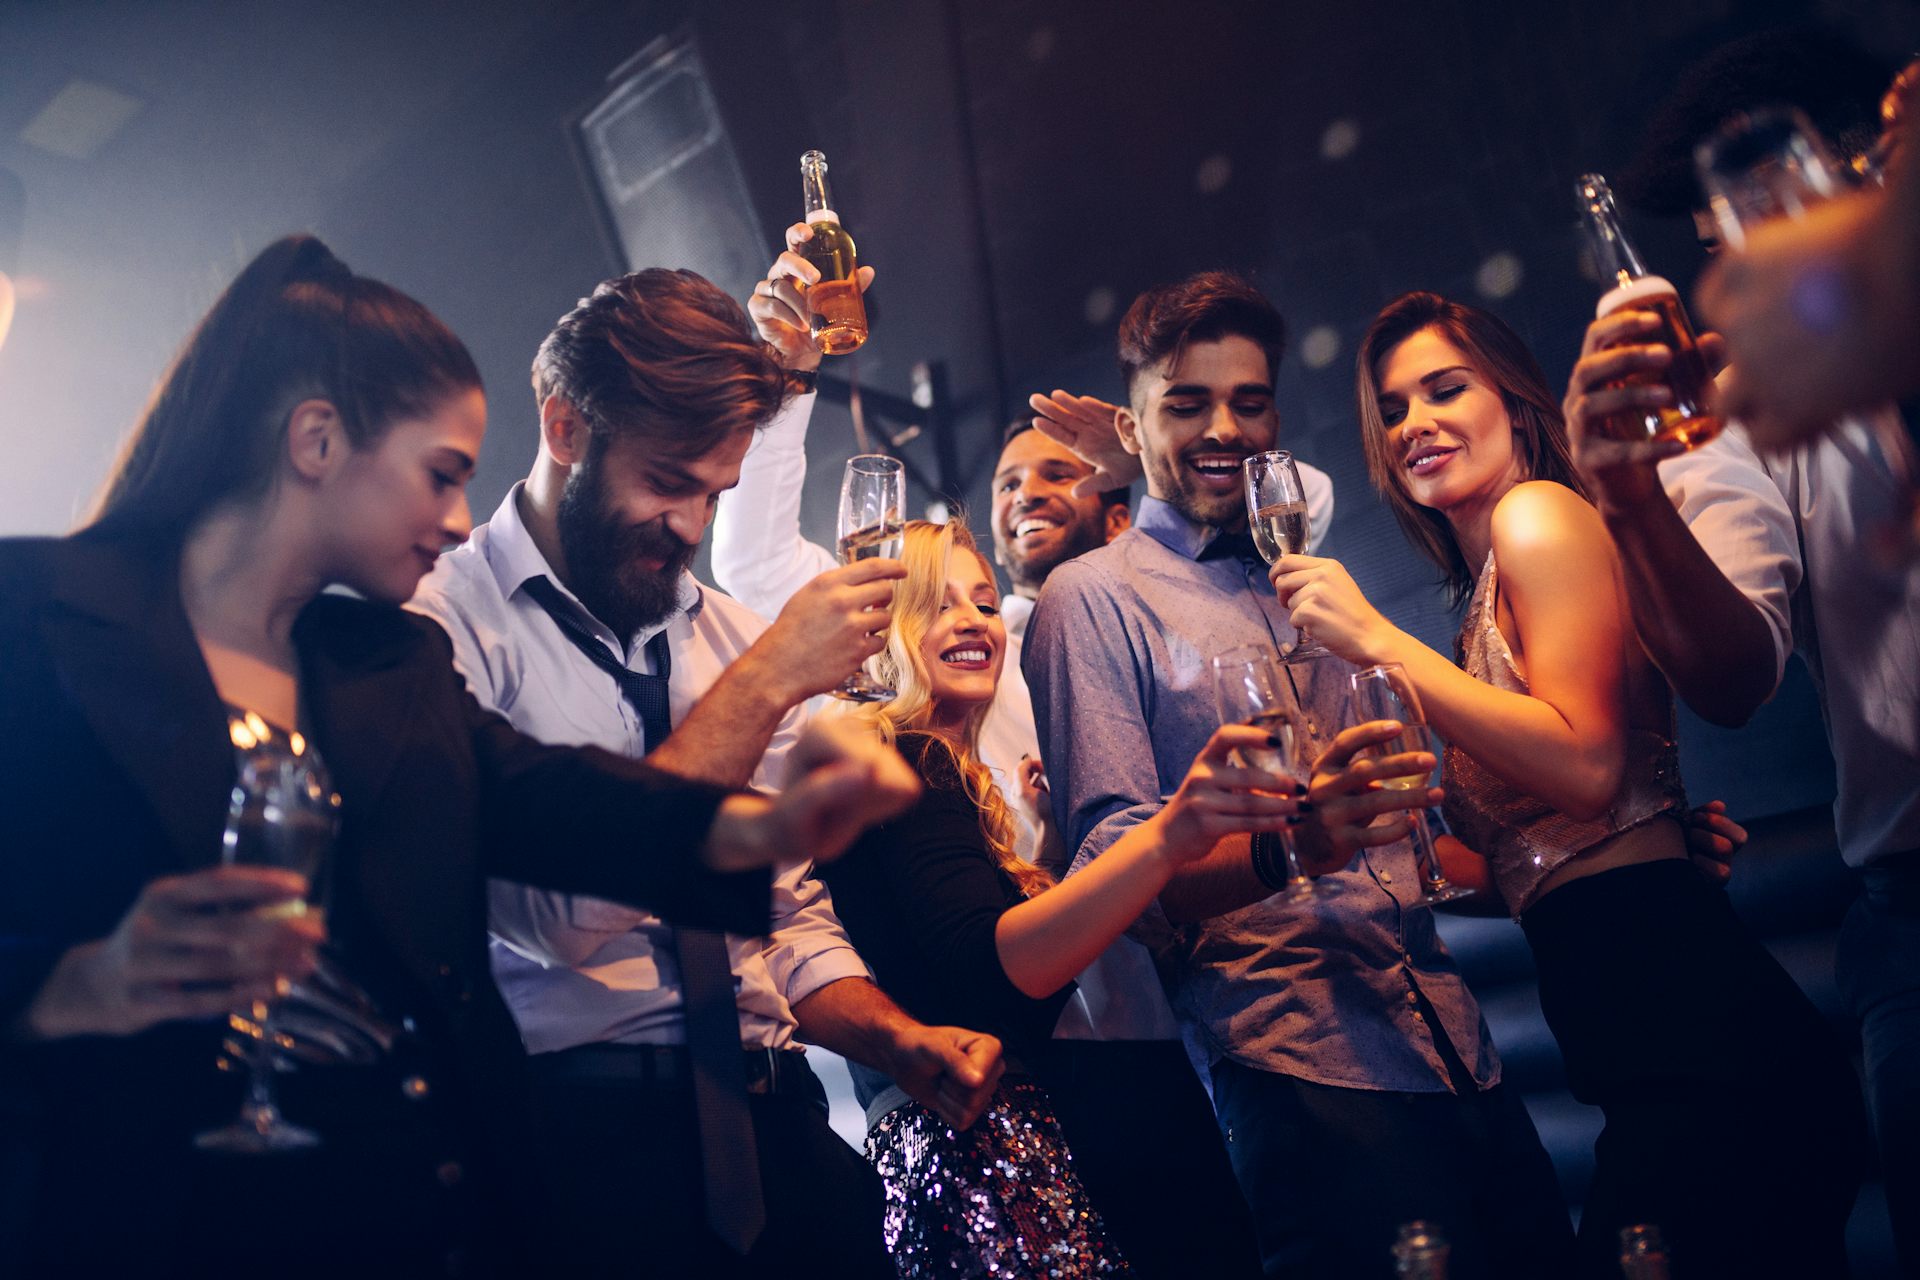 Groping, grinding, grabbing new research on nightclubs finds men do it often but know its wrong image image